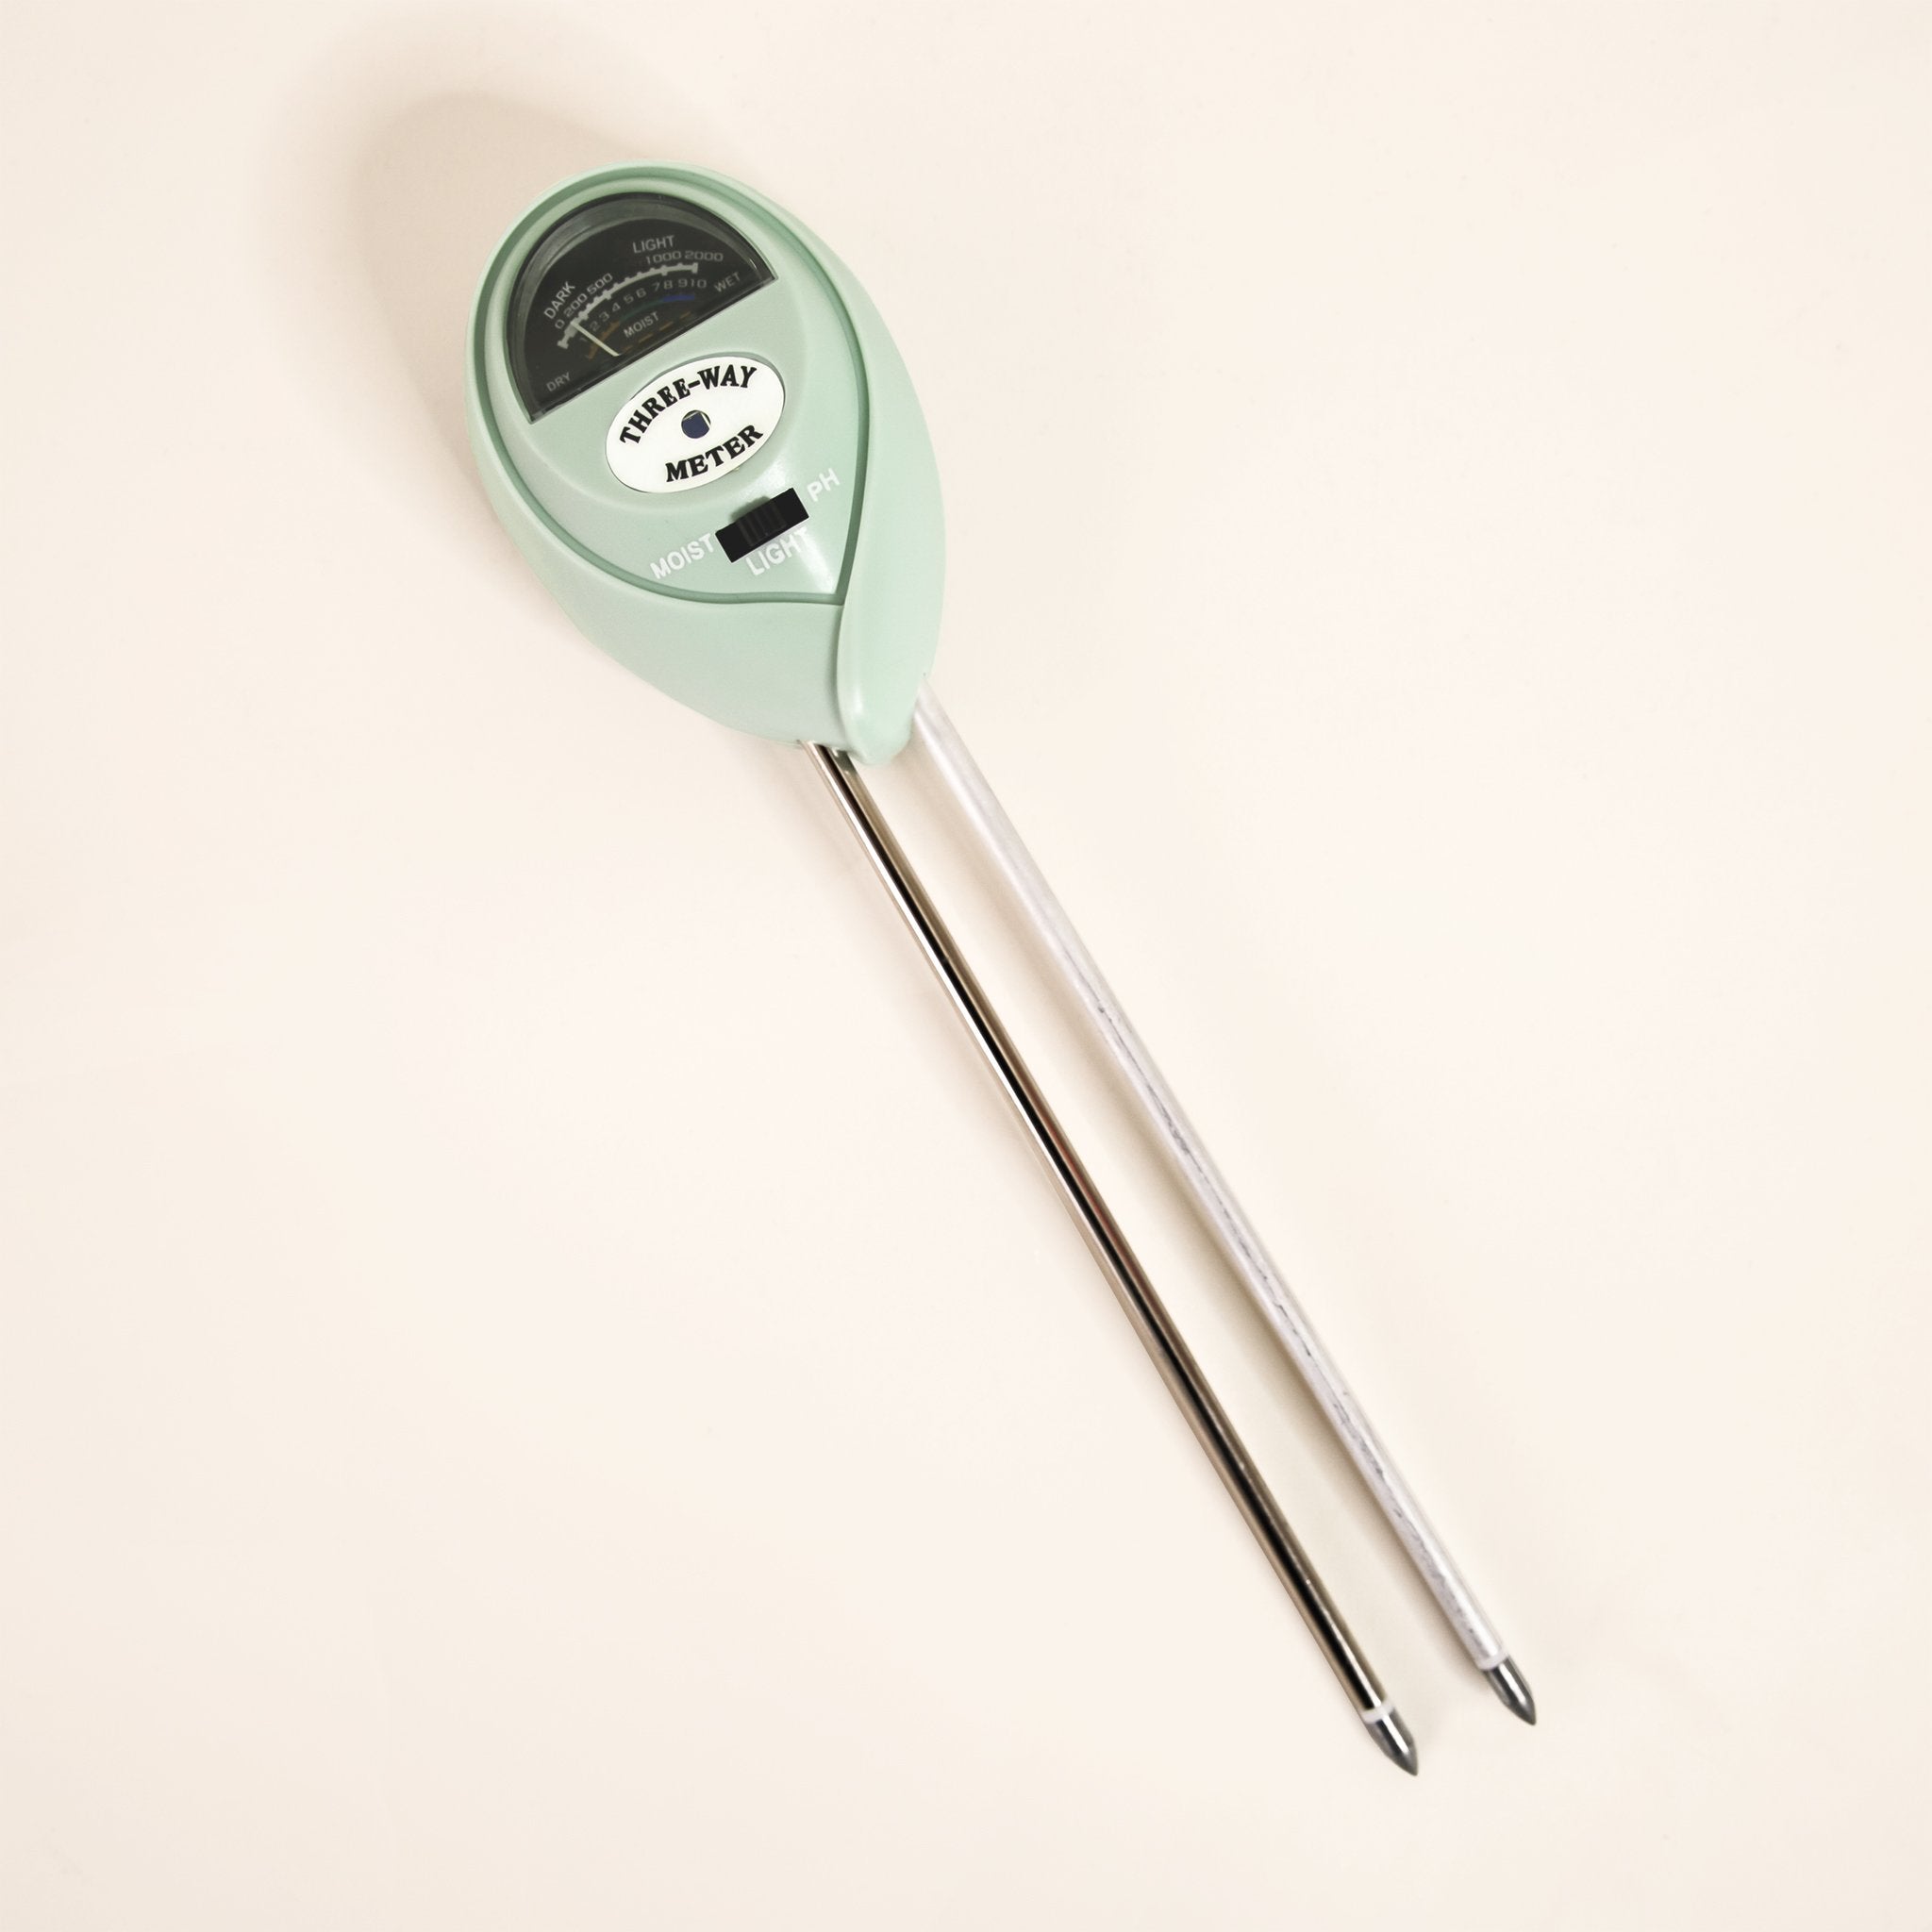 A light blue moisture meter with a circular head and a meter with a black background and text in the center that reads, "Three-way Meter" in black writing along with two long metal points that are meant to go into your plant's soil to determine the moisture levels.